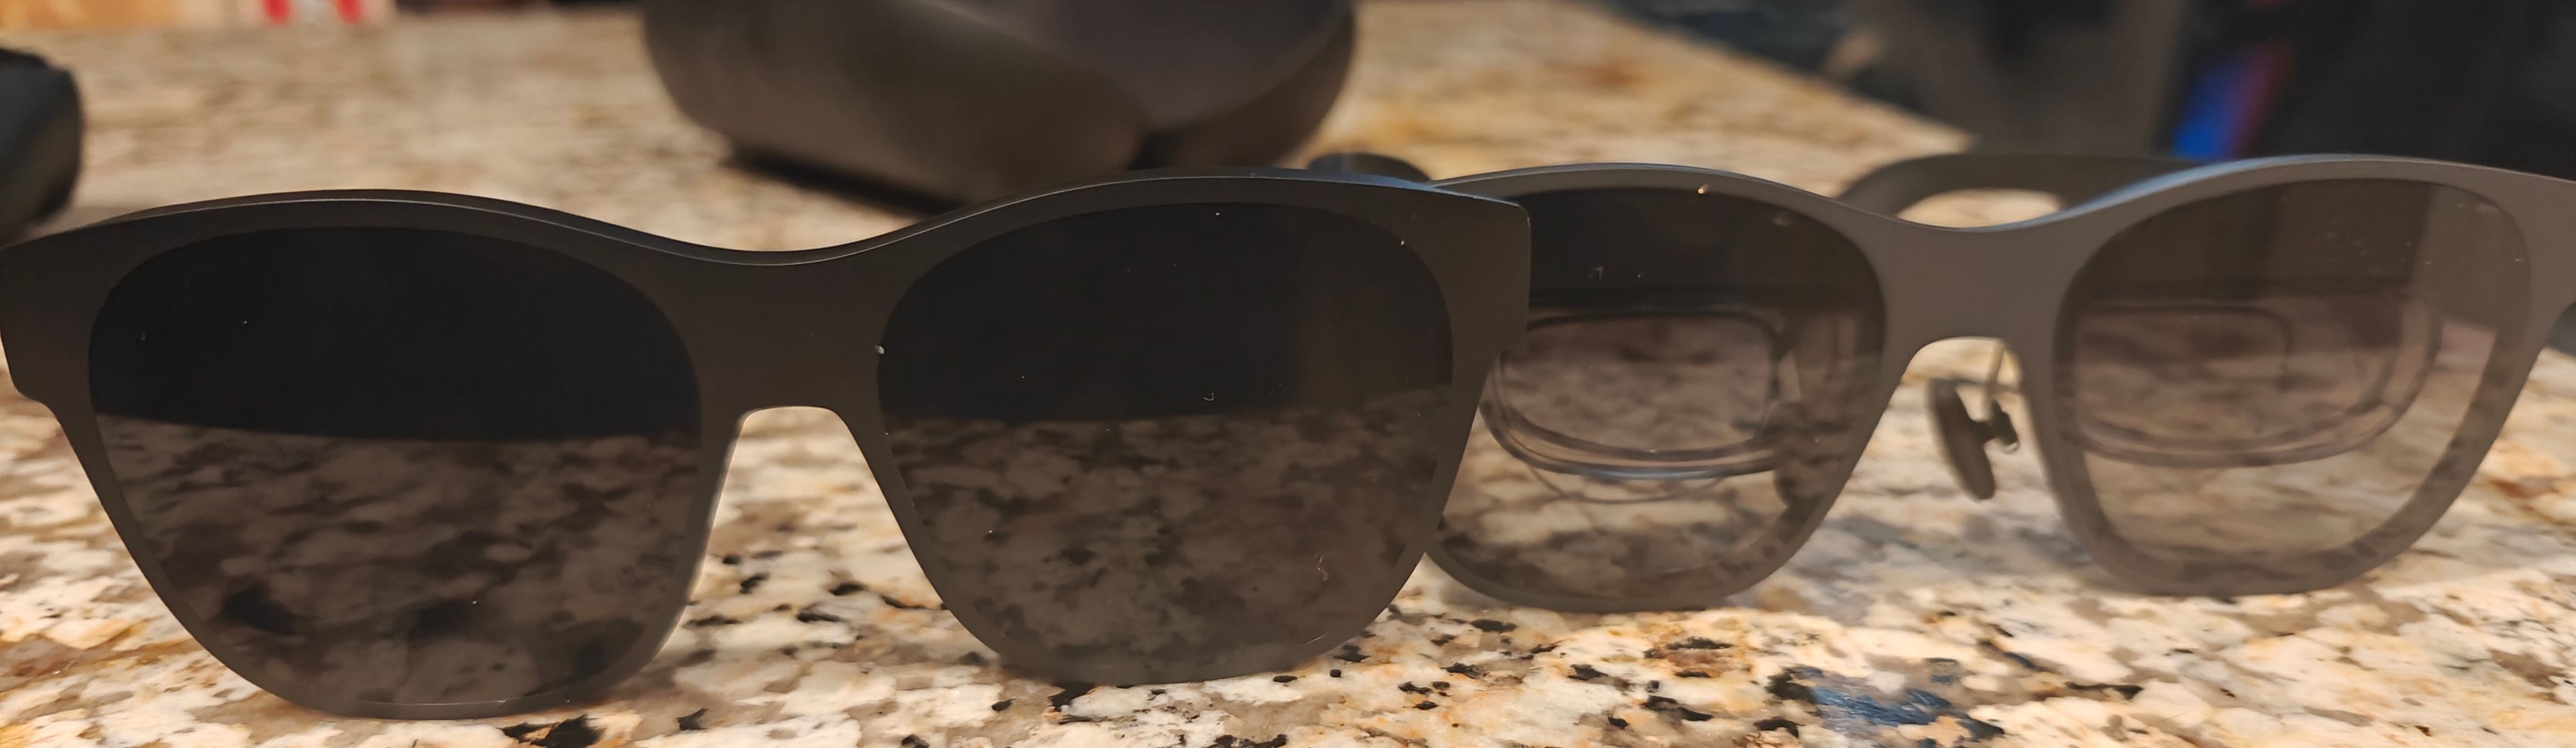 XREAL Air2 Glasses Review – I'm impressed!